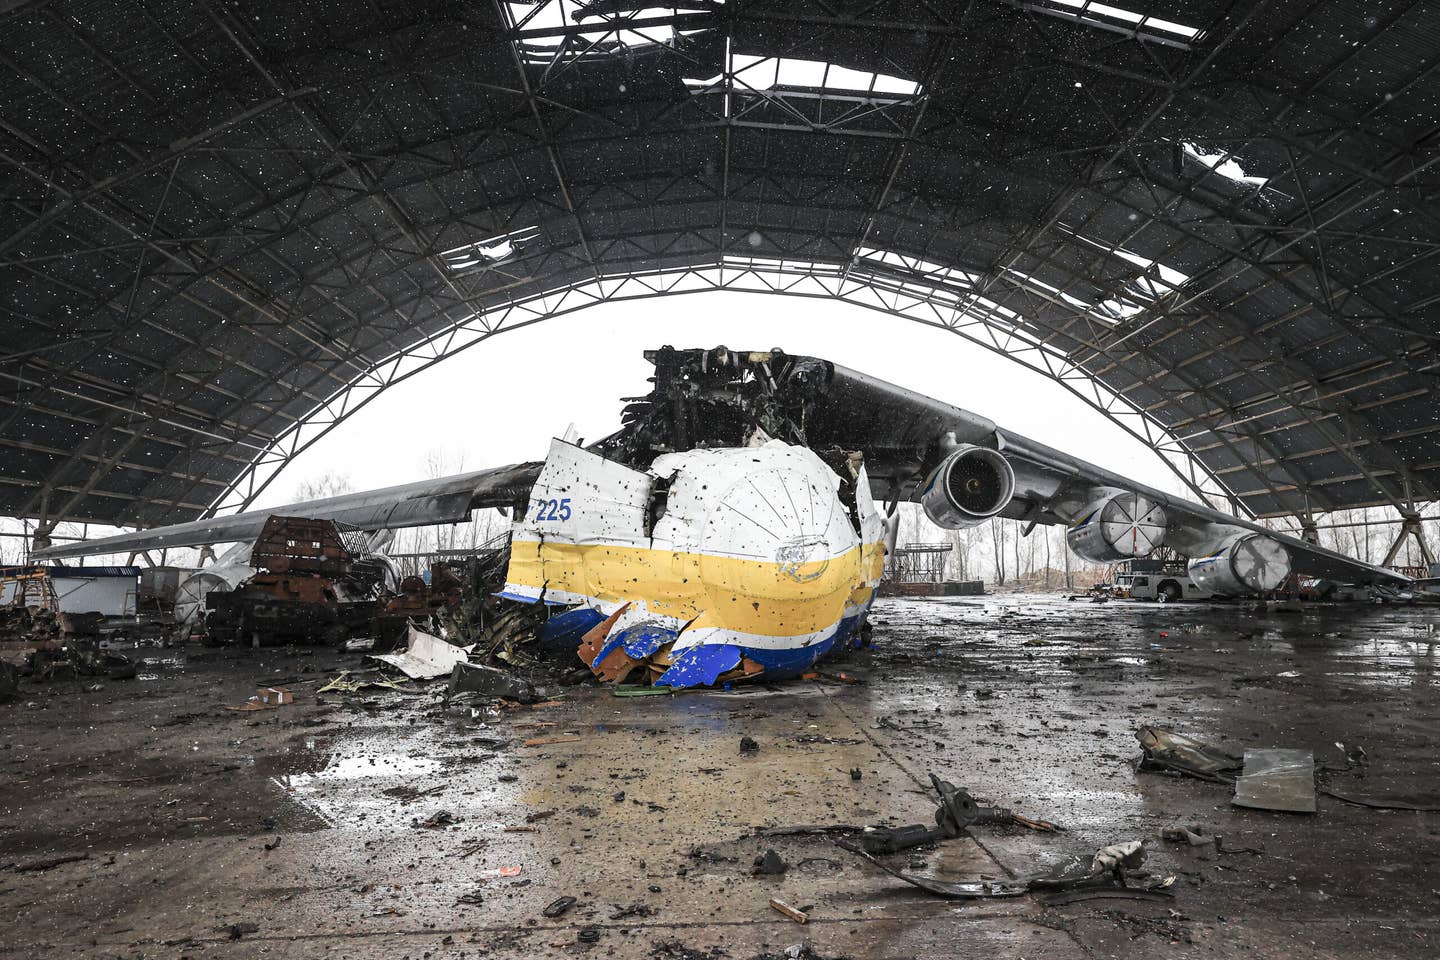 A view of the wreckage of Antonov An-225 Mriya cargo plane, the world's biggest operational aircraft, destroyed by Russian shelling. (Photo by Metin Aktas/Anadolu Agency via Getty Images)